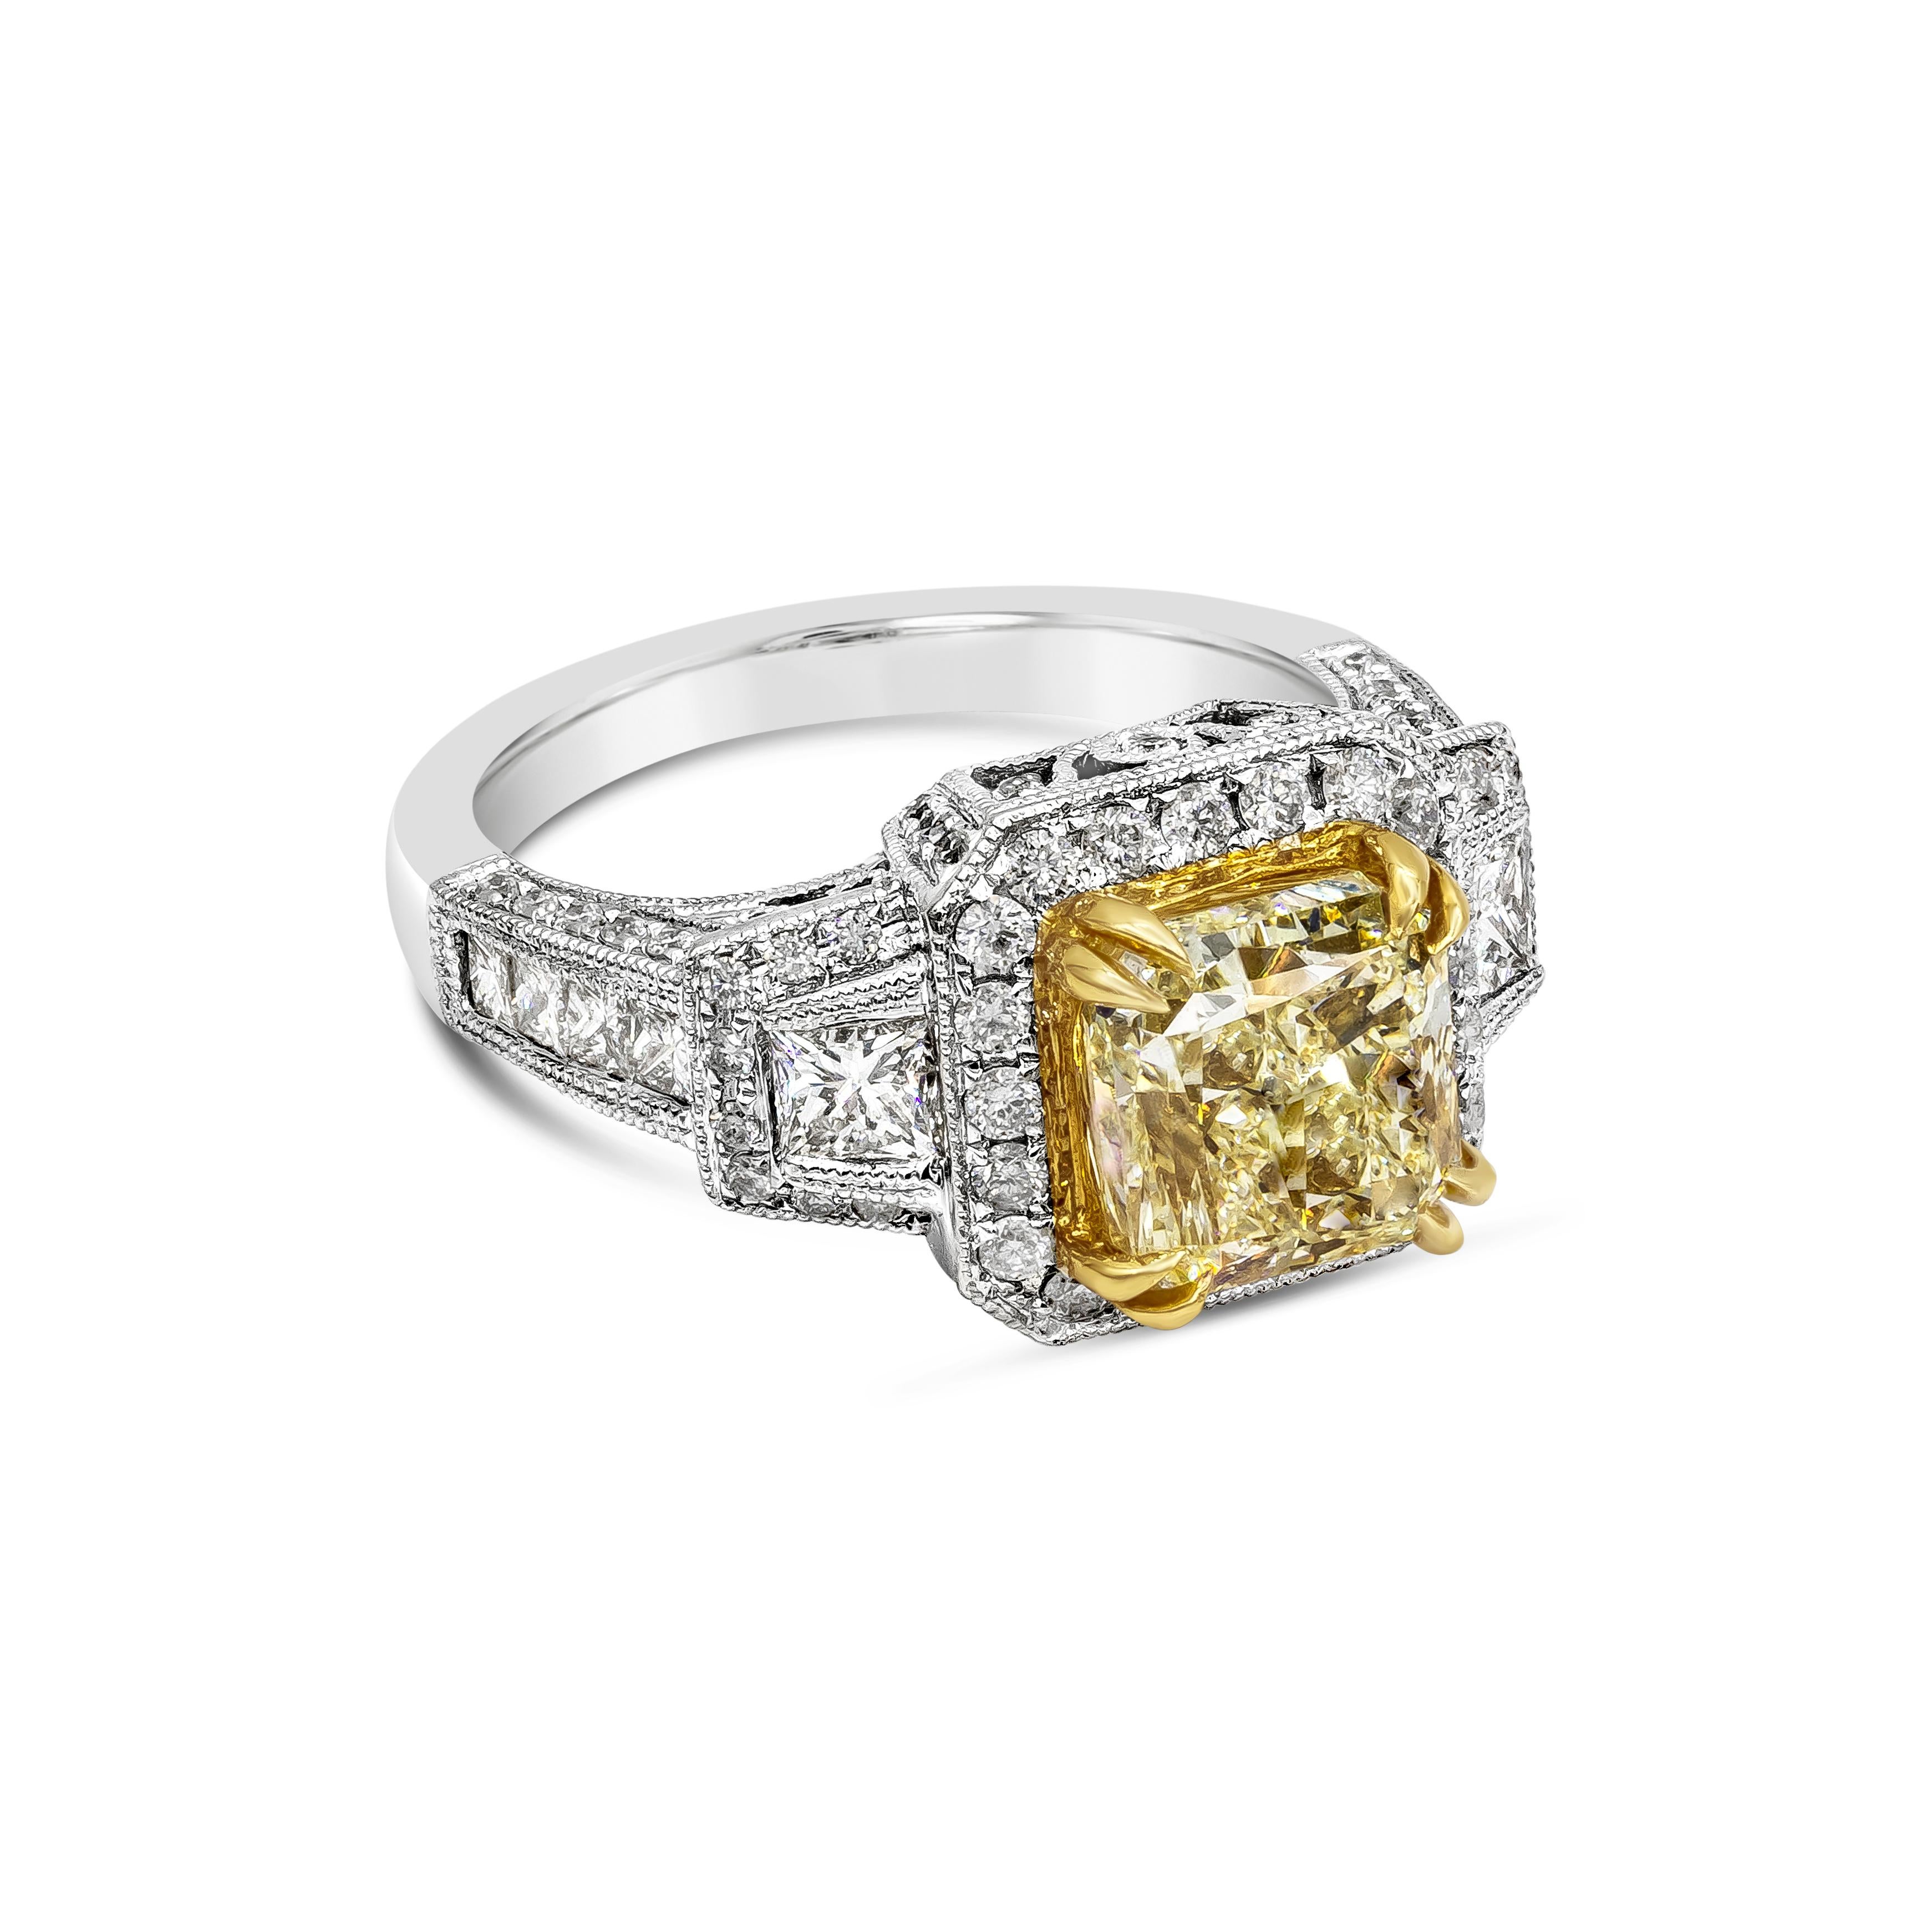 An antique style engagement ring, showcasing a 3.40 carat radiant cut yellow diamond certified by GIA as Y-Z Color and SI1 clarity, set in eight prong 18K yellow gold. Surrounded by round diamonds in halo setting and accented by two brilliant